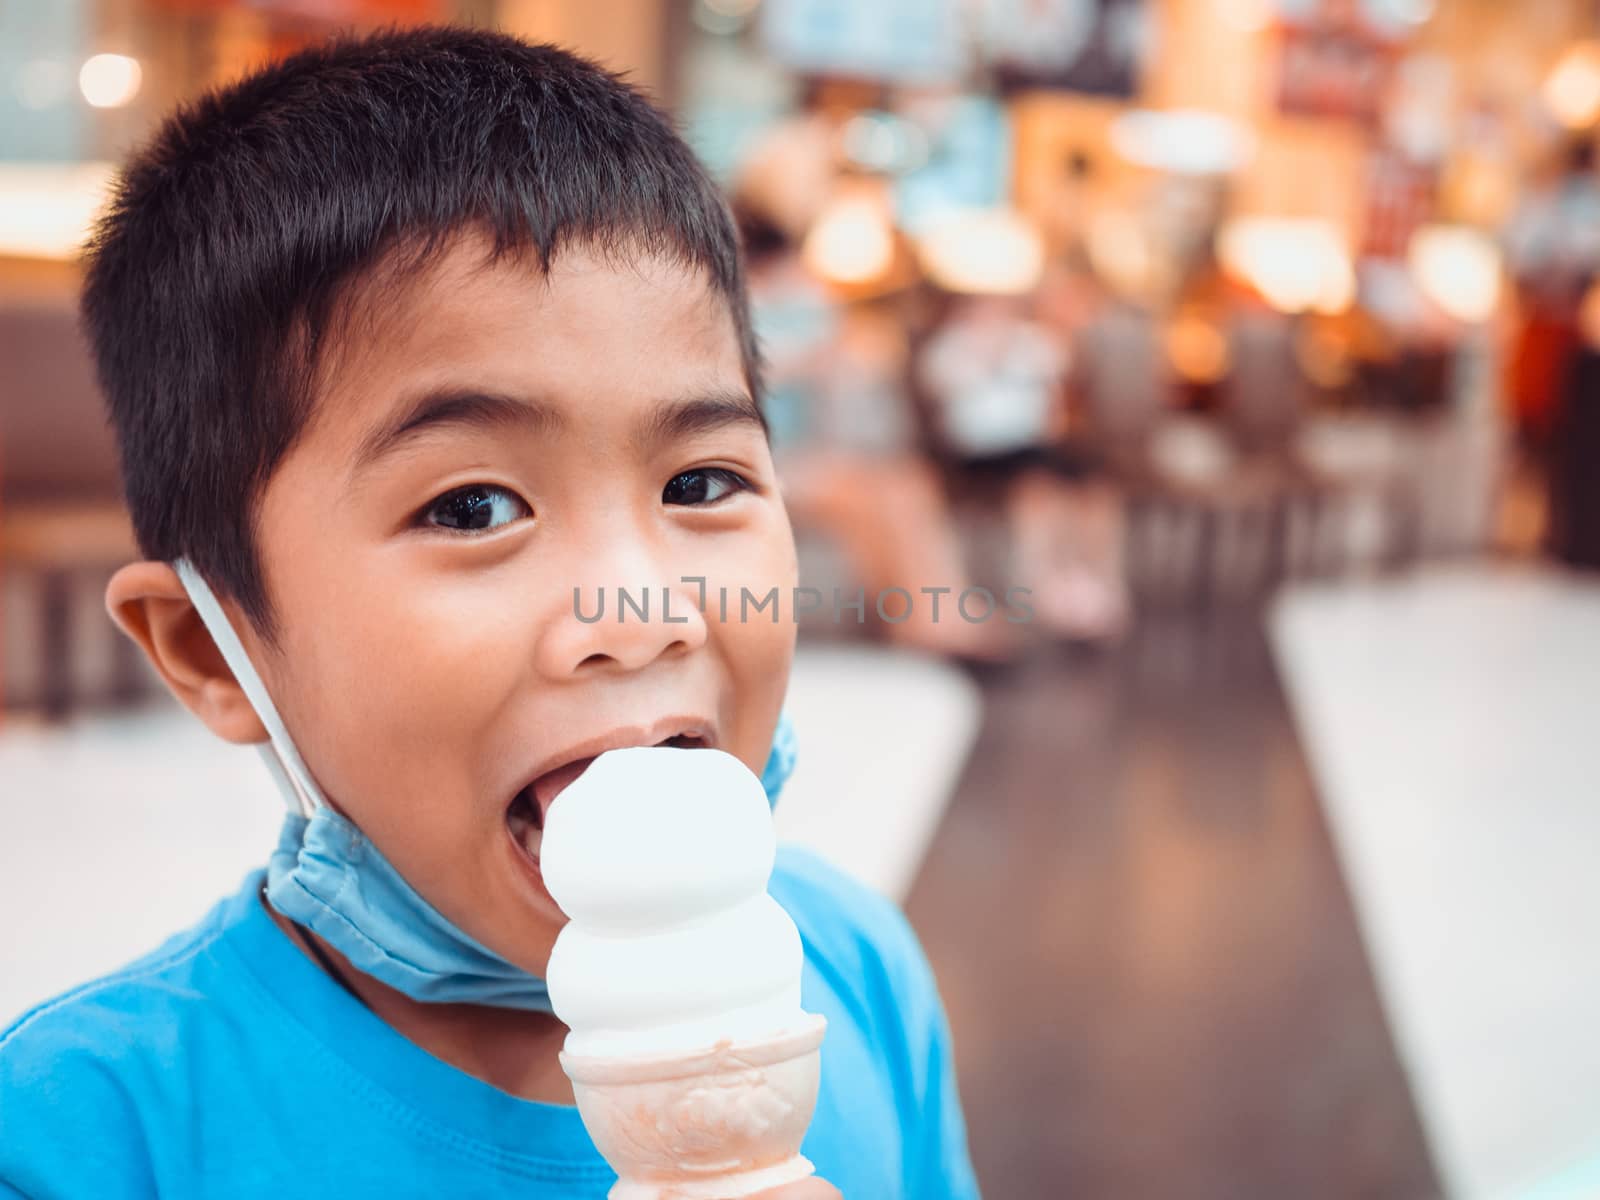 A boy eating ice cream inside a mall with a blurred background by Unimages2527